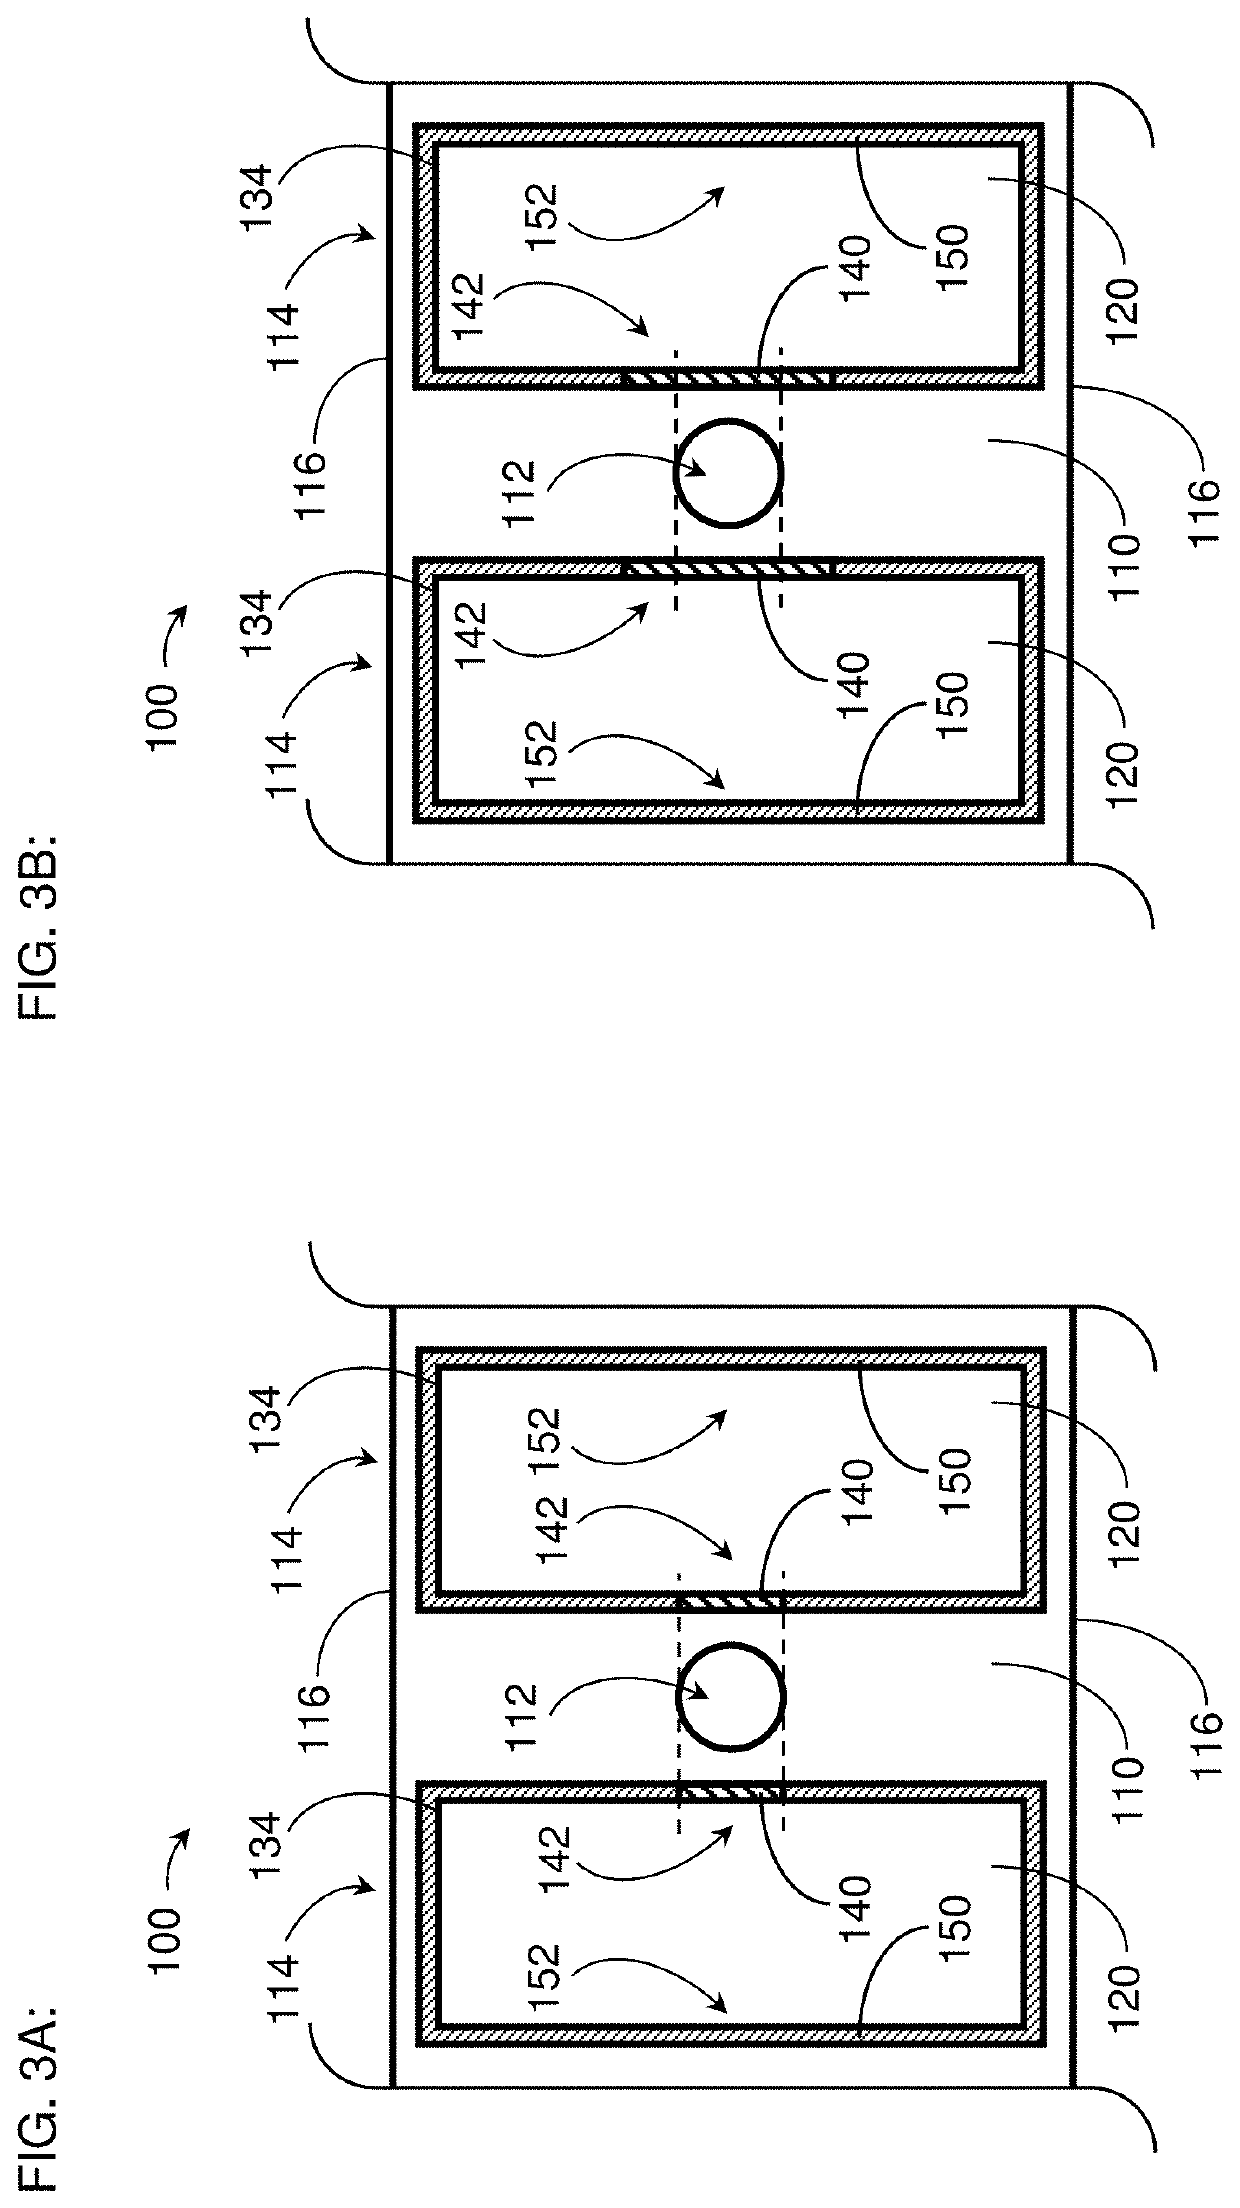 Thermoelectric device having a plurality of sealing materials